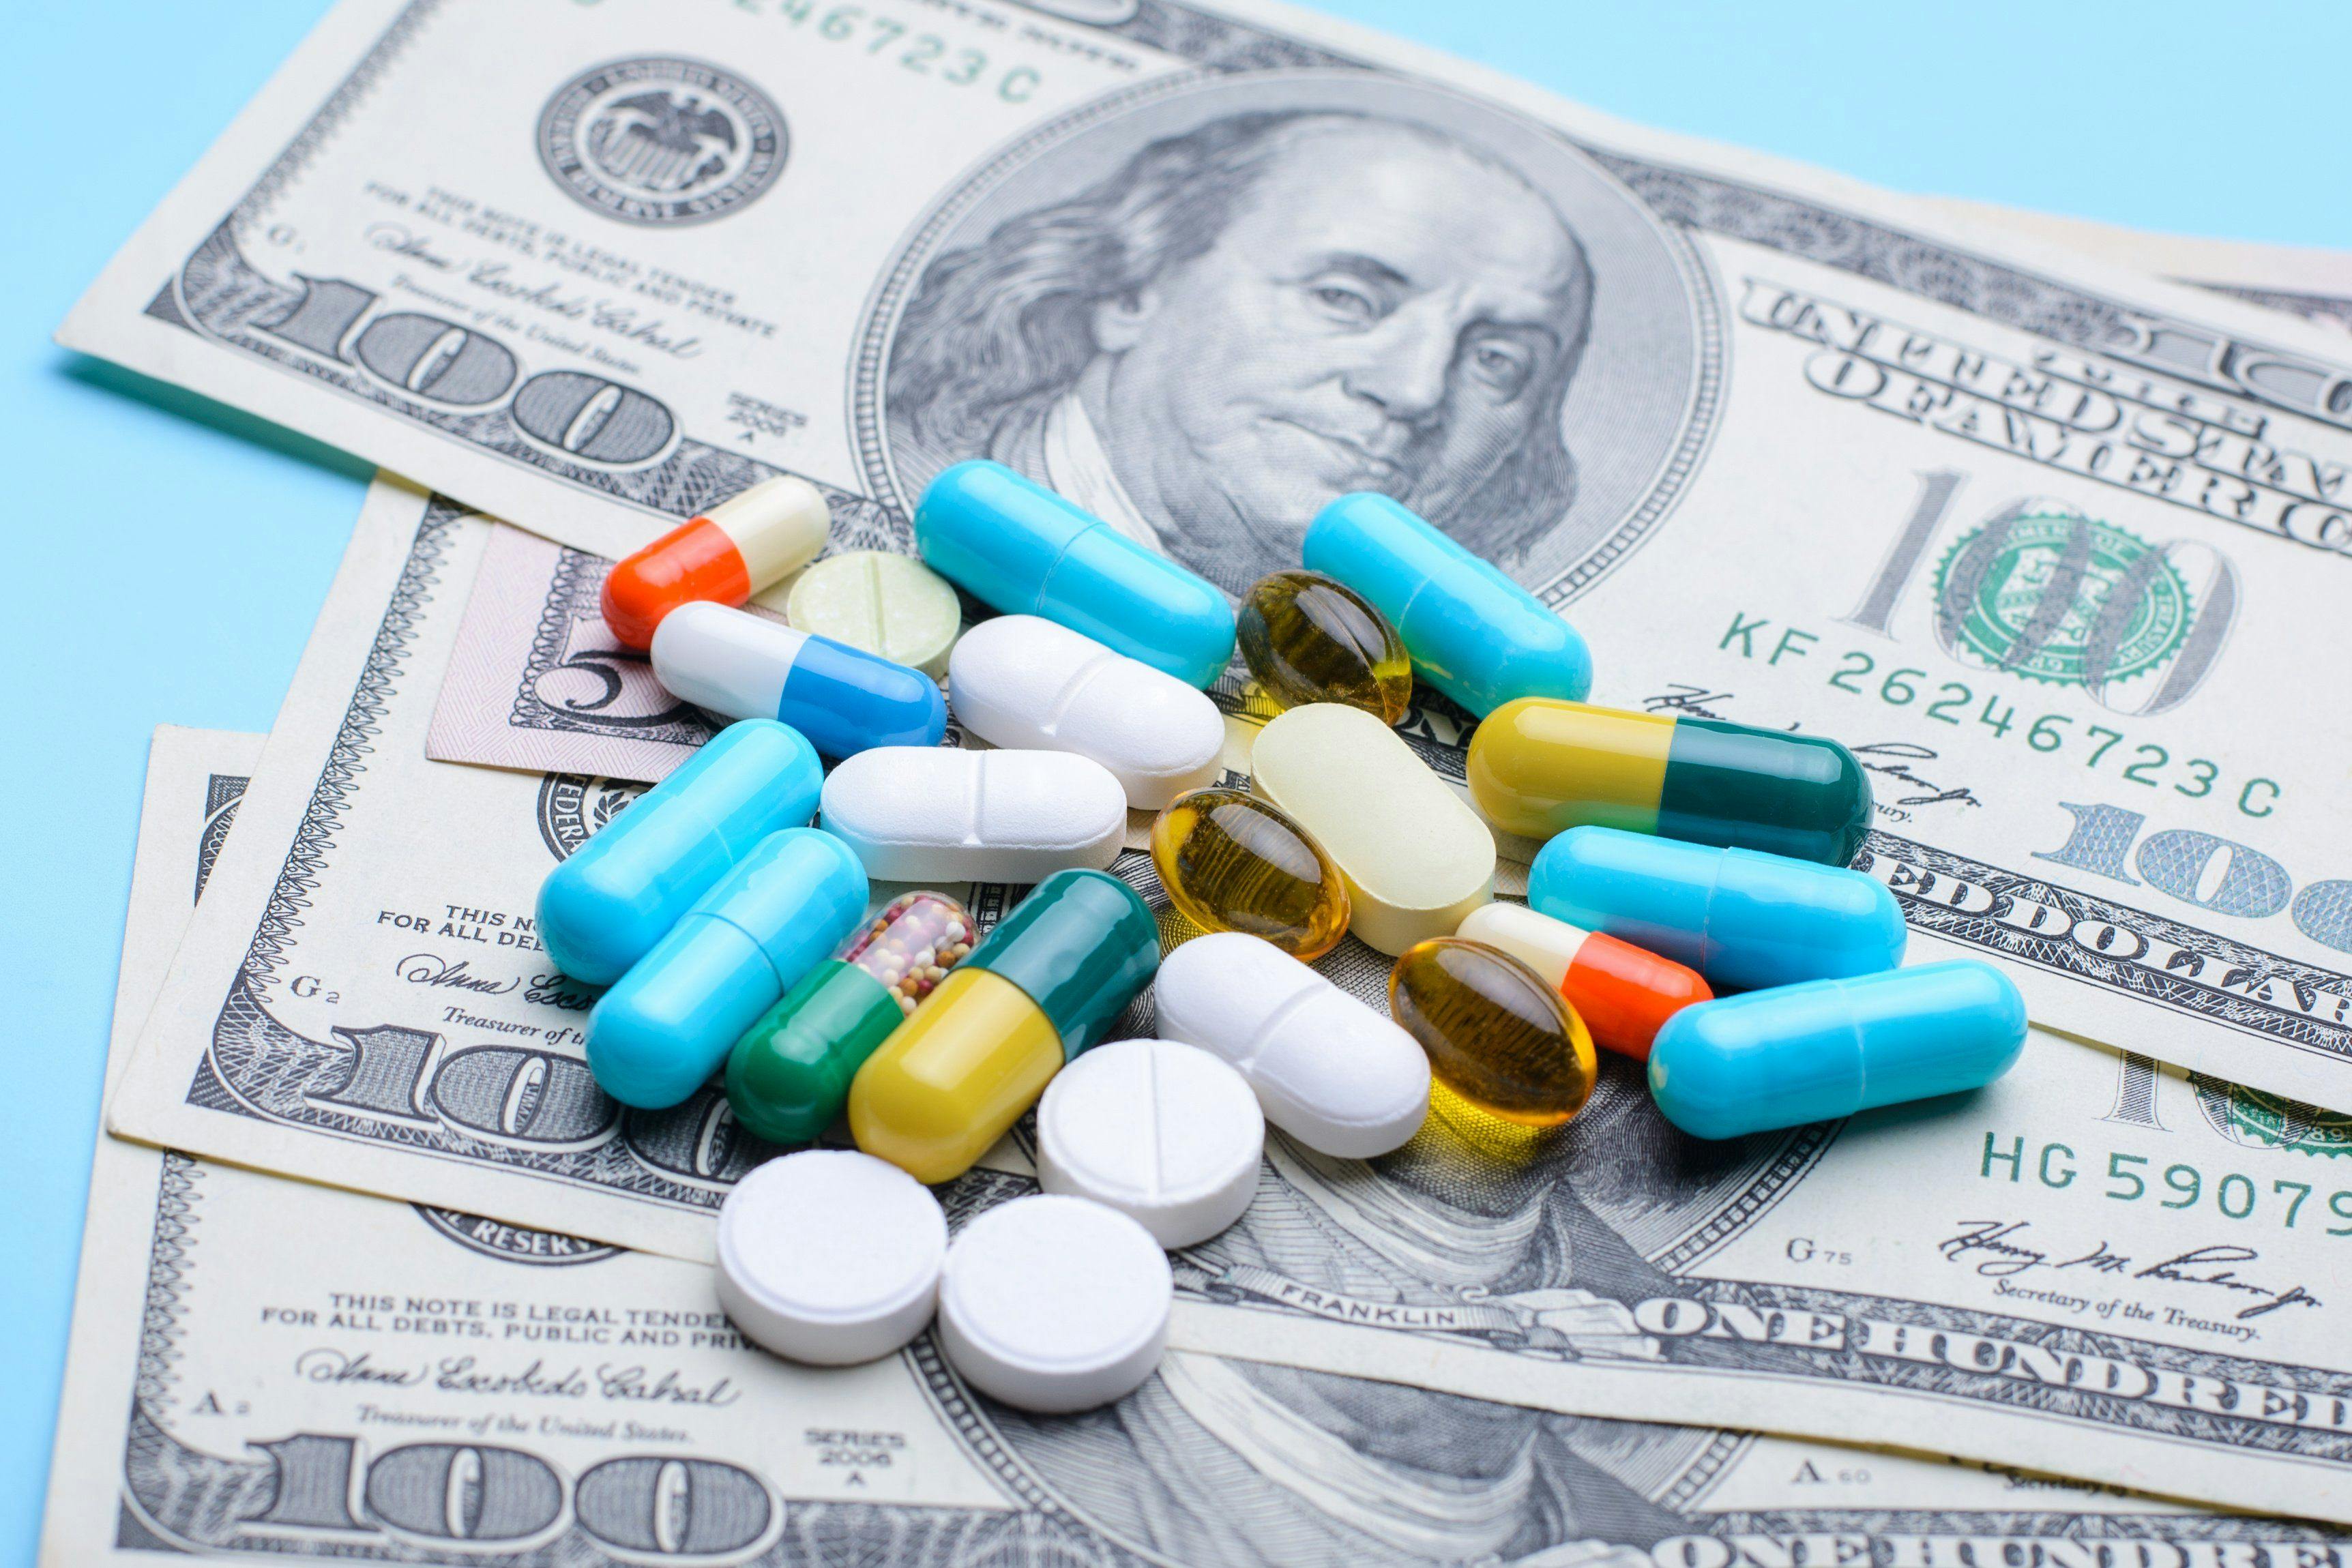 NIH gives nearly $2 million grant to fund development of non-opiate chronic pain treatment